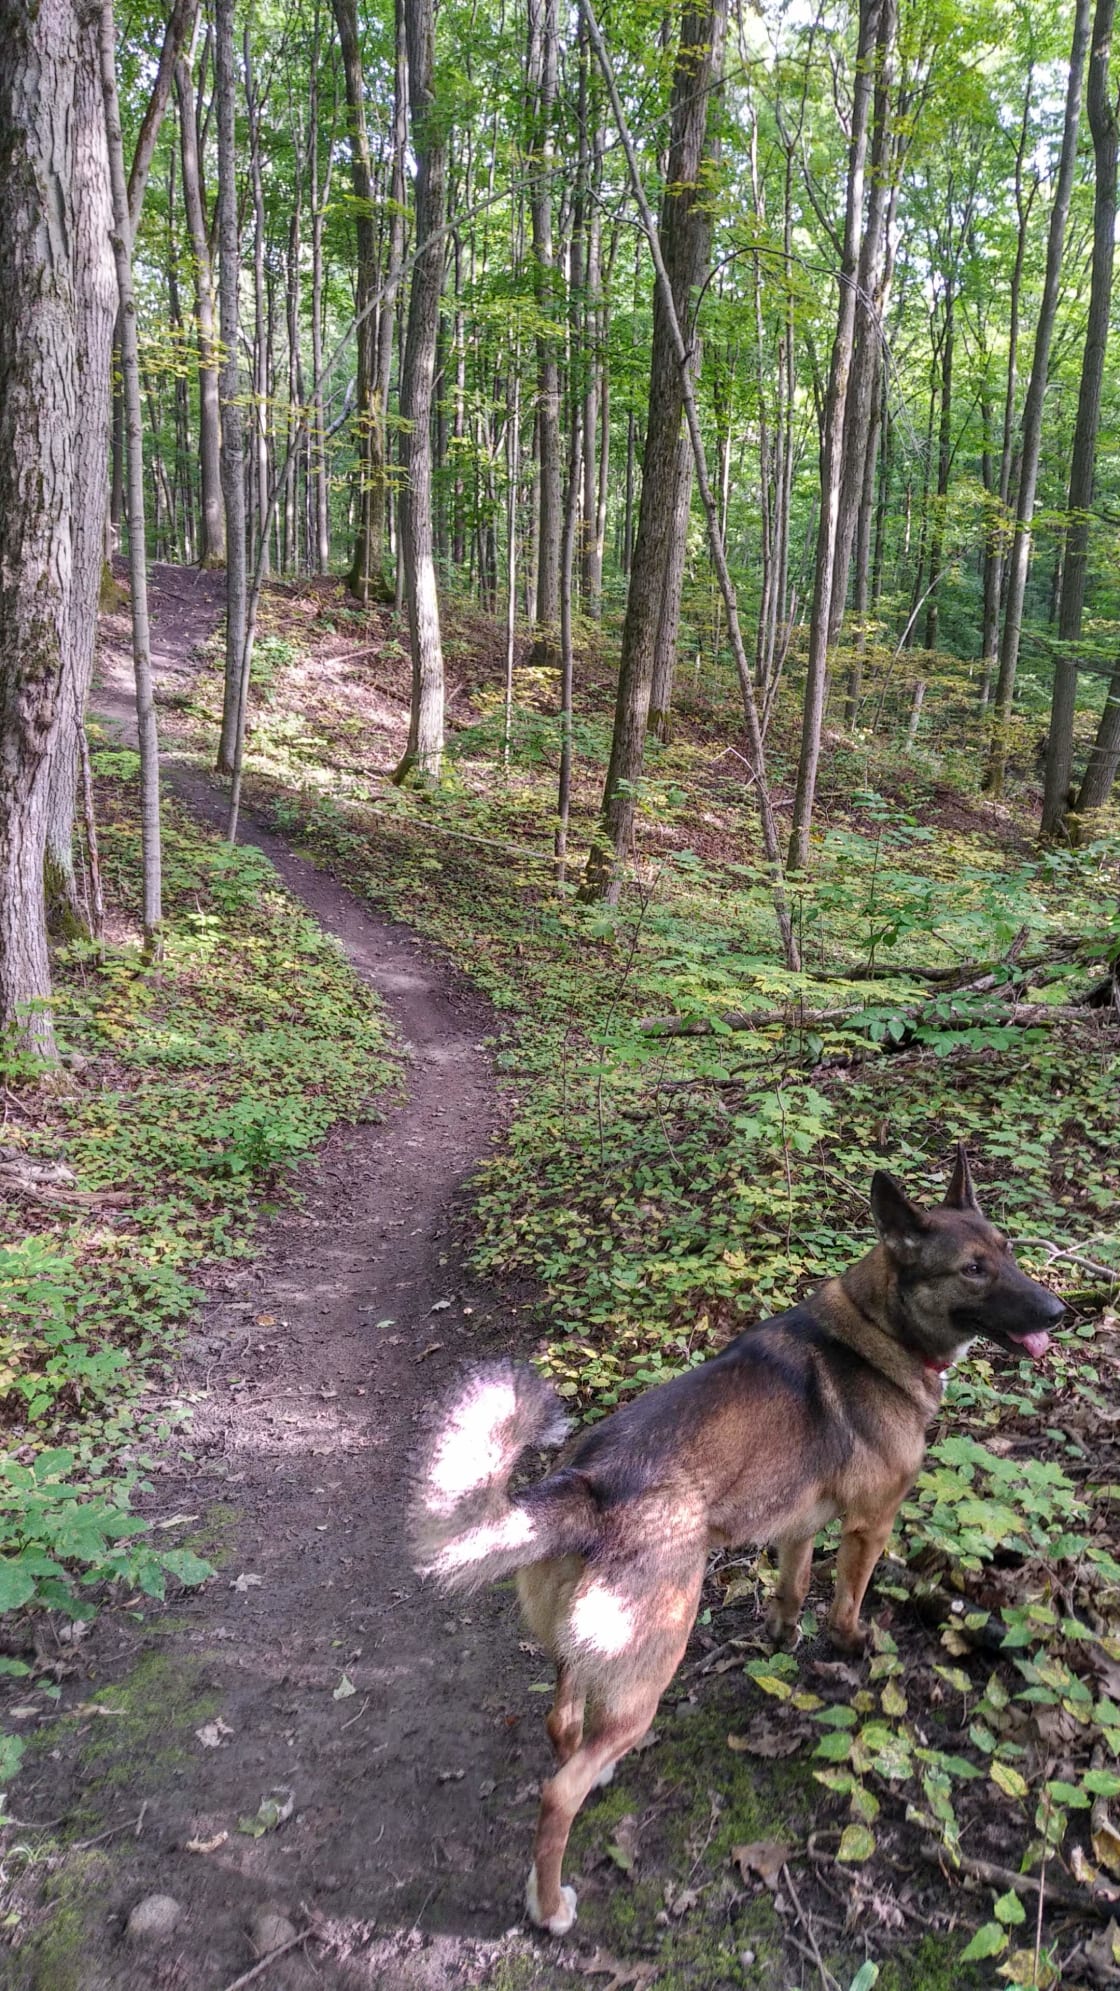 Bomber inspecting the trail for squirrels